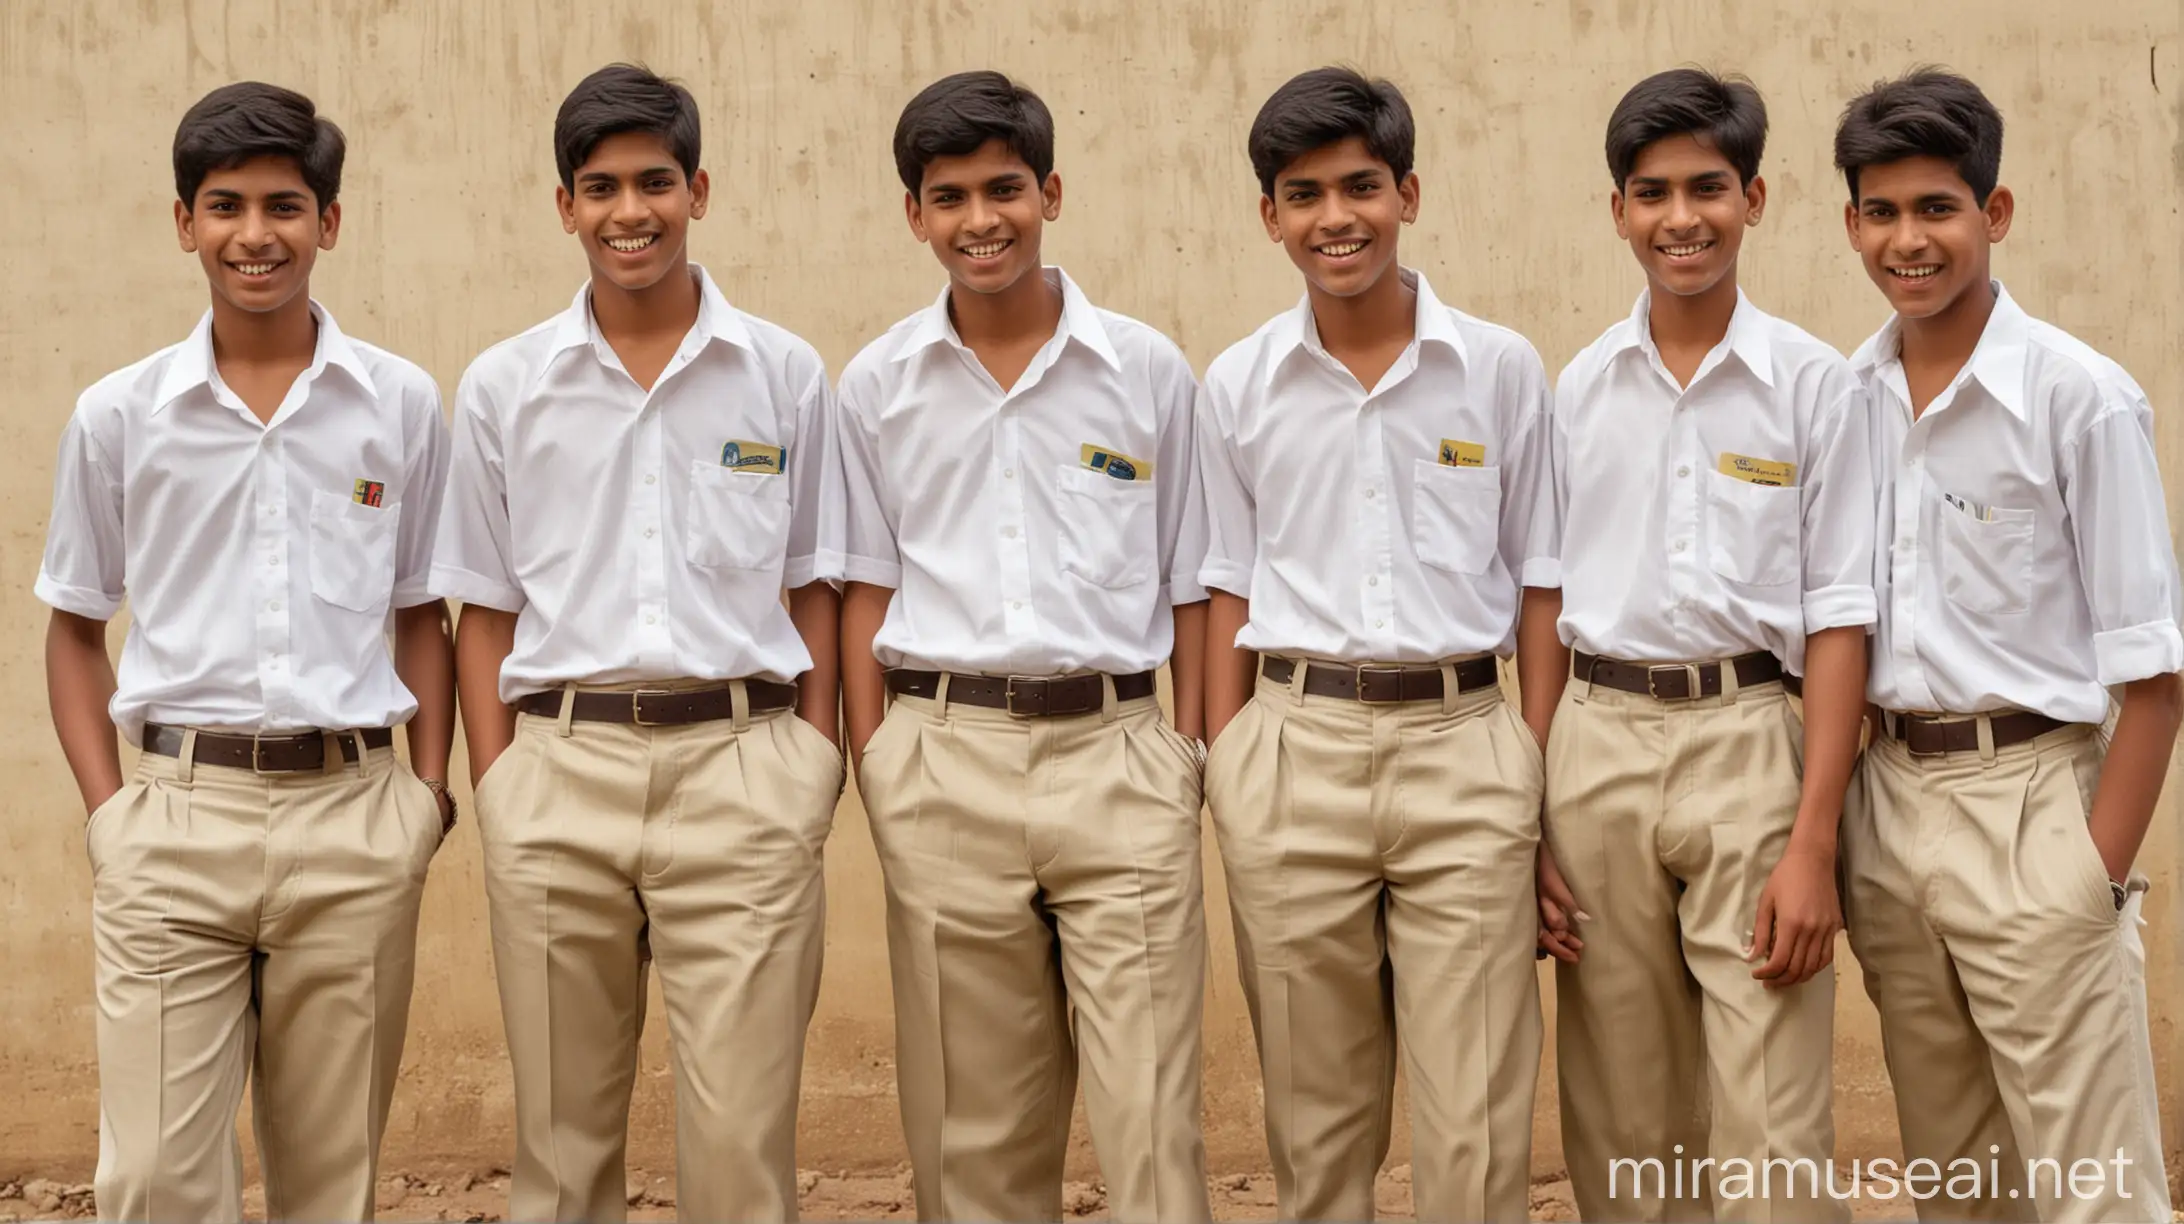 Indian school teenage boys from the 90s wearing khaki pants and white shirts for uniform enjoying a barf gola